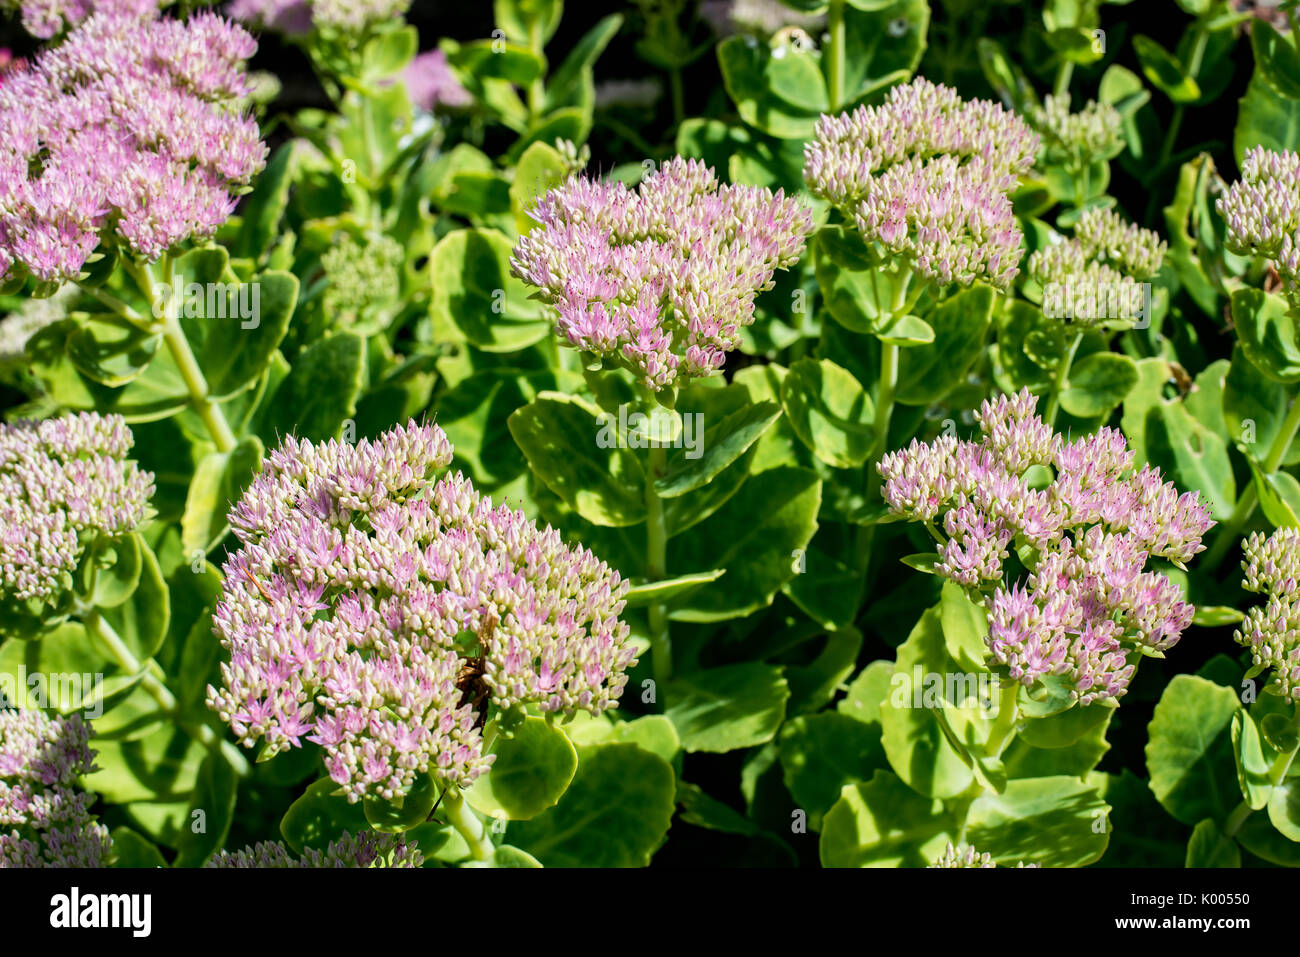 Pink Flowering Ice Plants Outdoors In An English Garden Stock Photo